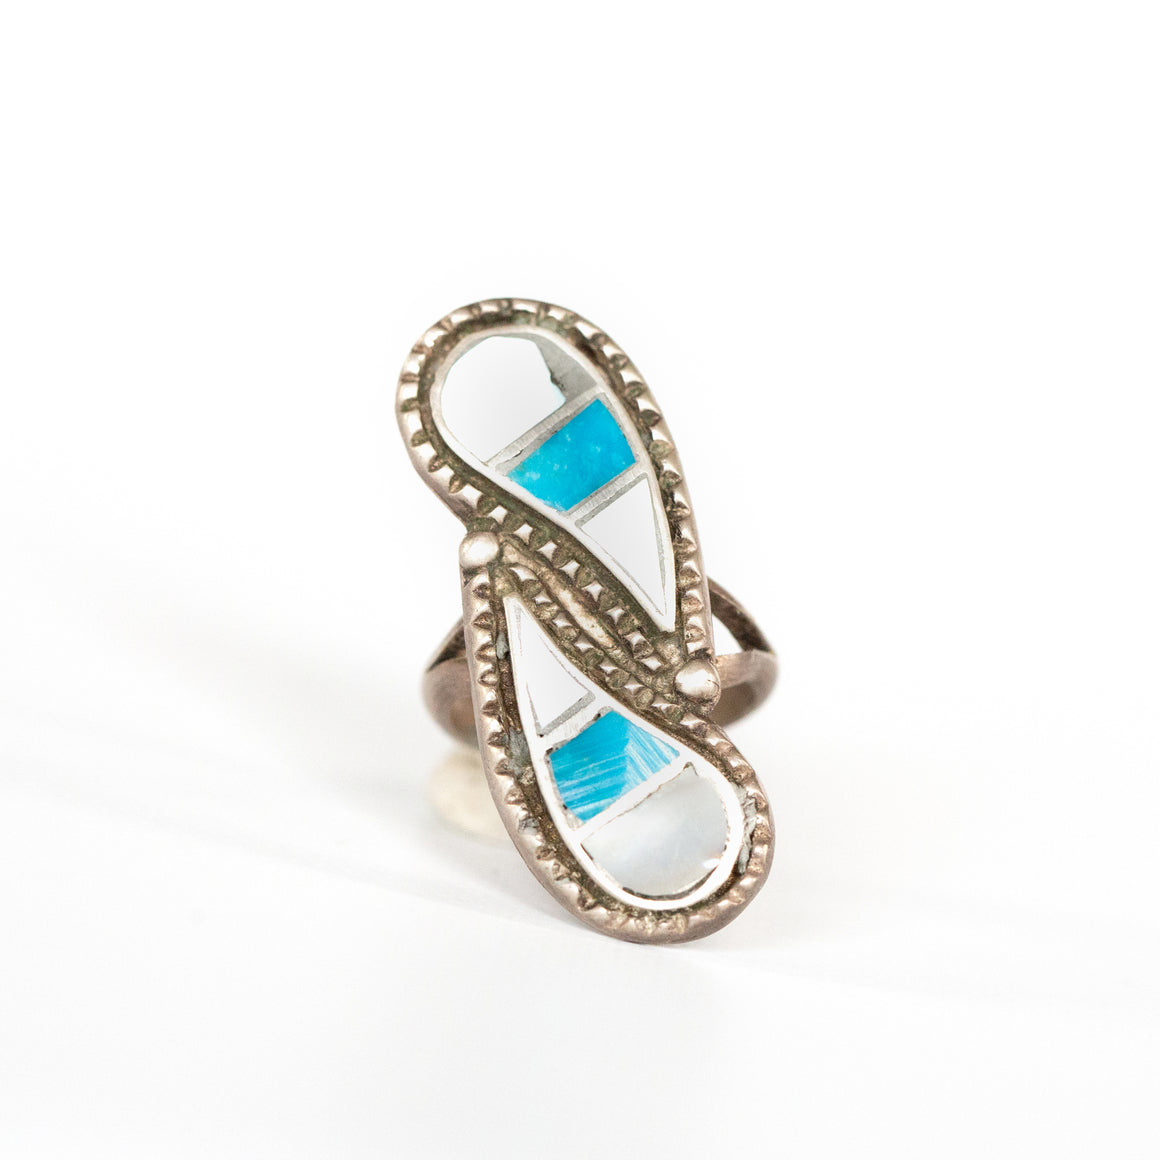 VINTAGE JEWELRY | STERLING WHITE & BLUE STONE RING (SIZE 5.5)